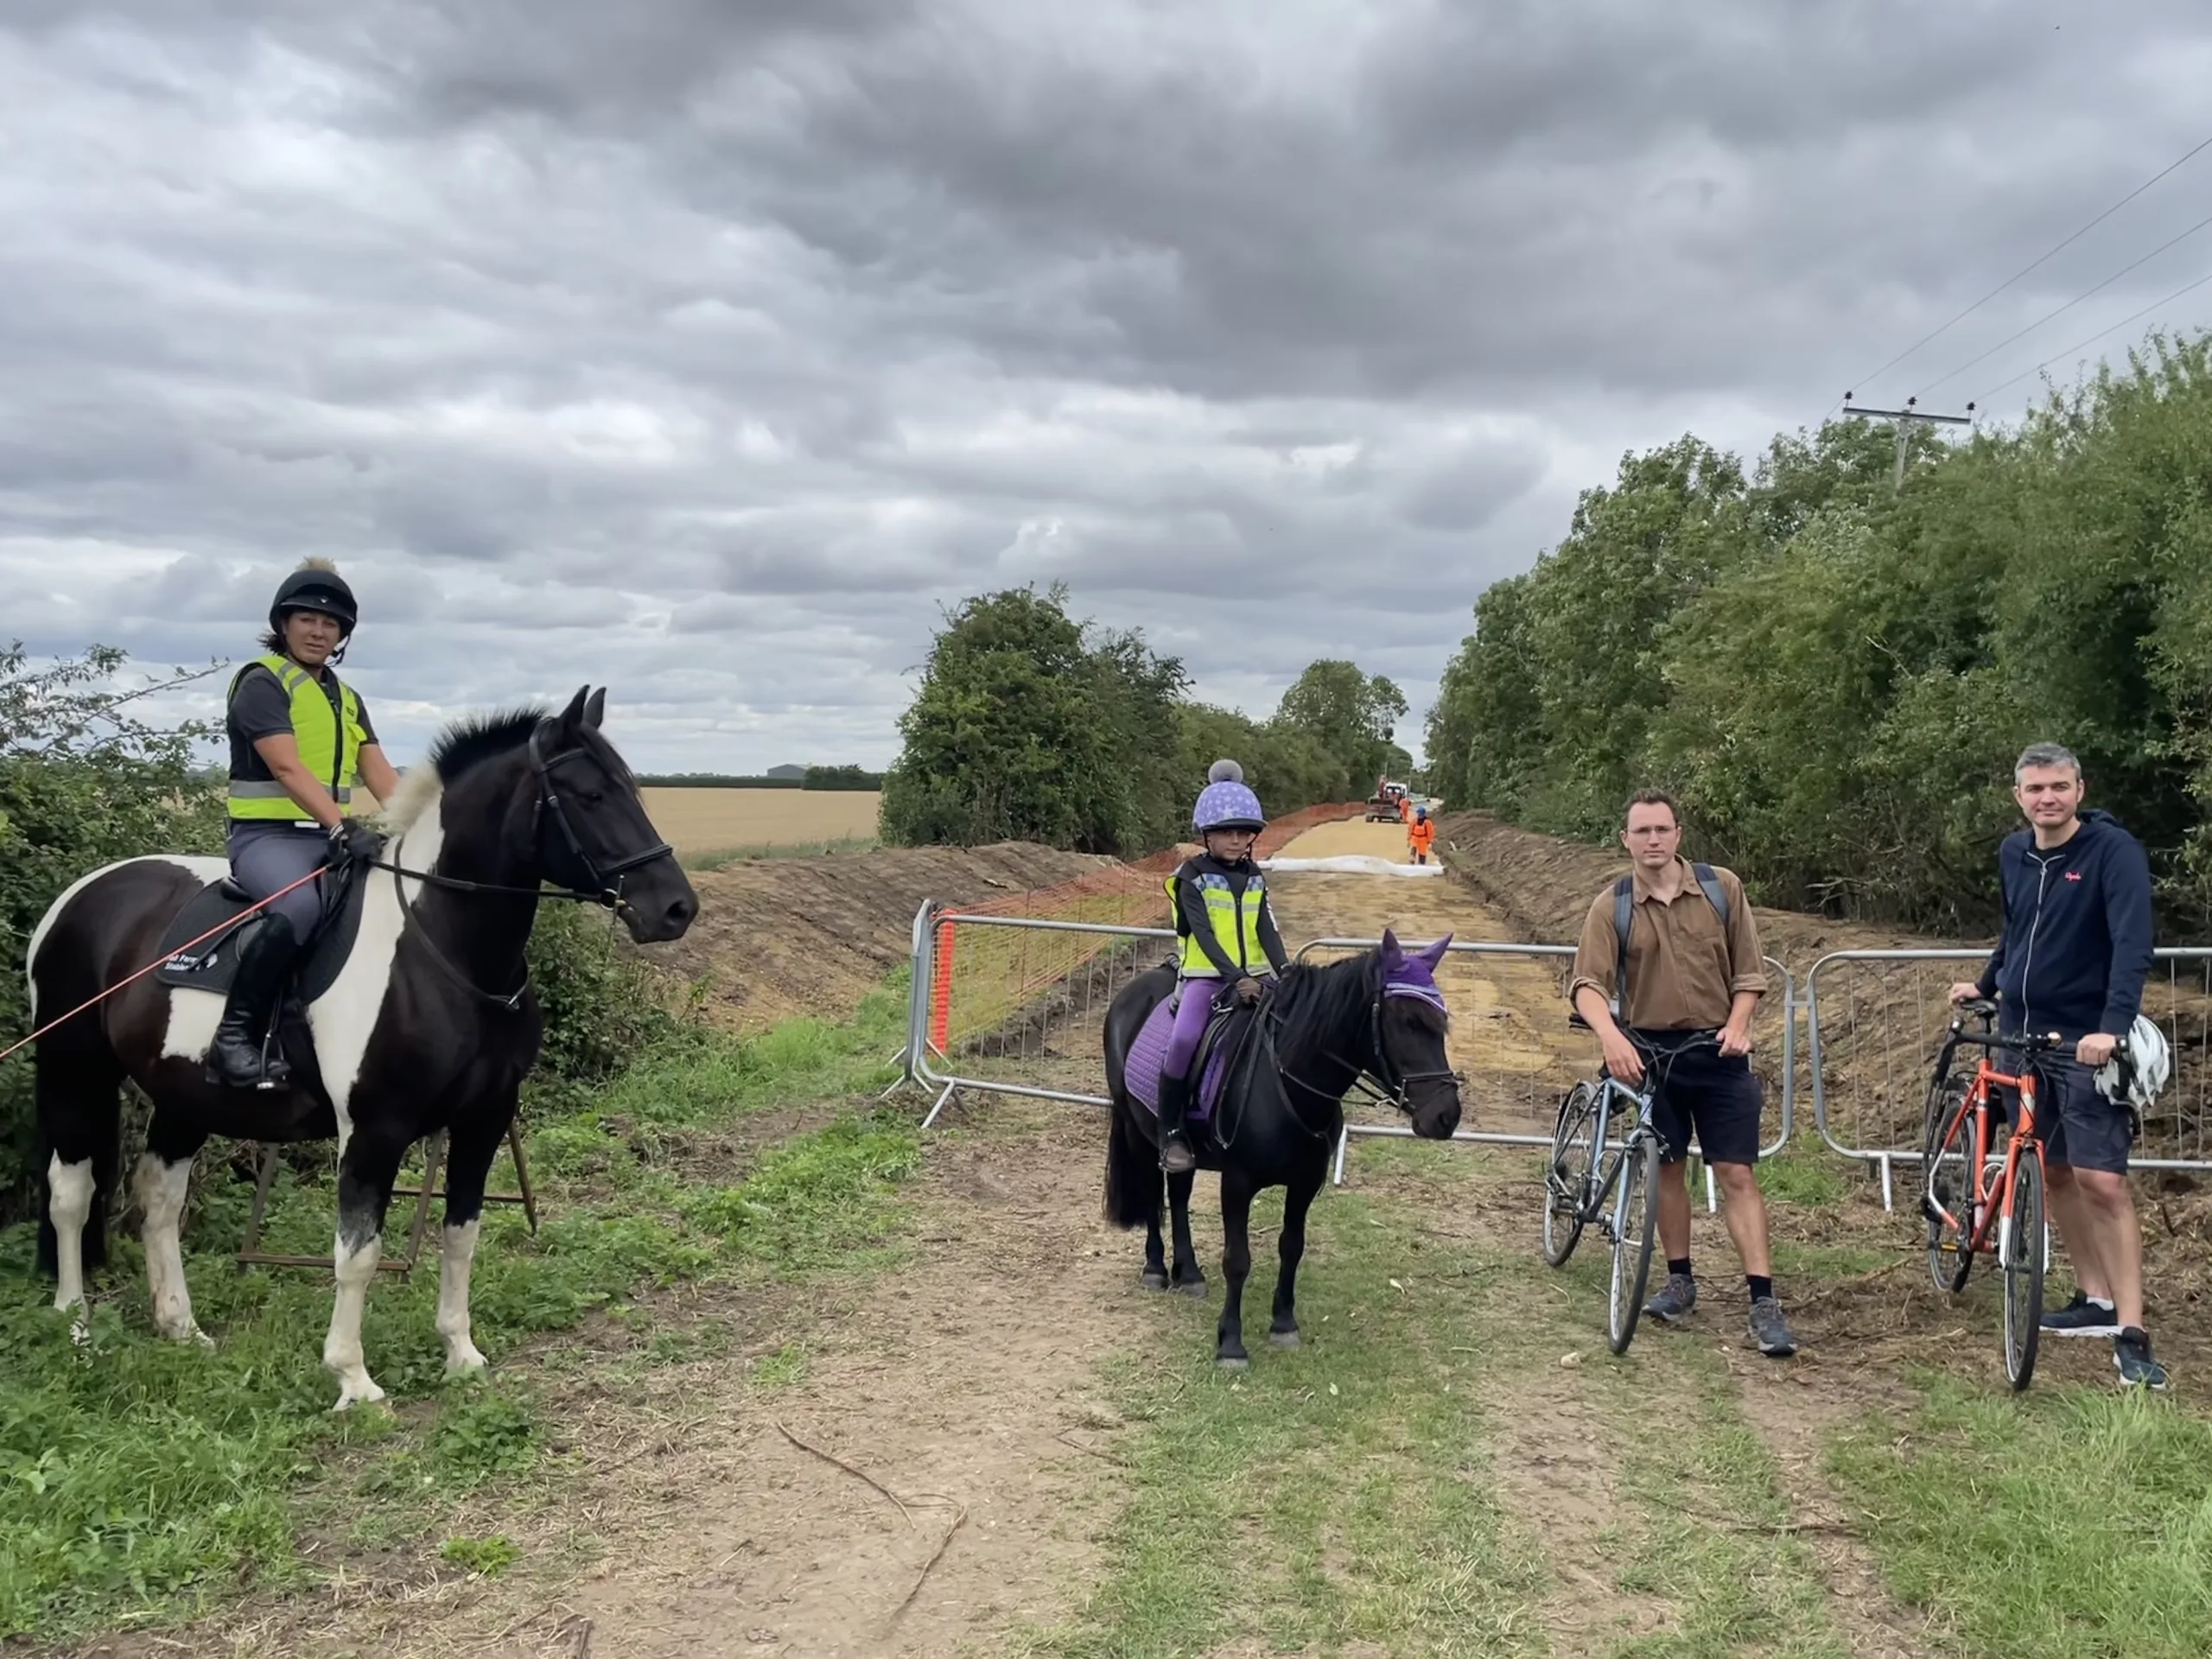 The photos show the works north of Butt Lane and the narrower section south of Butt Lane where trees are already being cleared. Those featured are Tessa Frost of Hall Farm Stables in Waterbeach on Bea and Violet Frost on Moppet. Josh Grantham (brown shirt) is the Infrastructure Campaigner for Camcycle and Gabriel Bienzobas (pictured in the north photo) is a Camcycle trustee and lead of Milton Cycling Campaign.